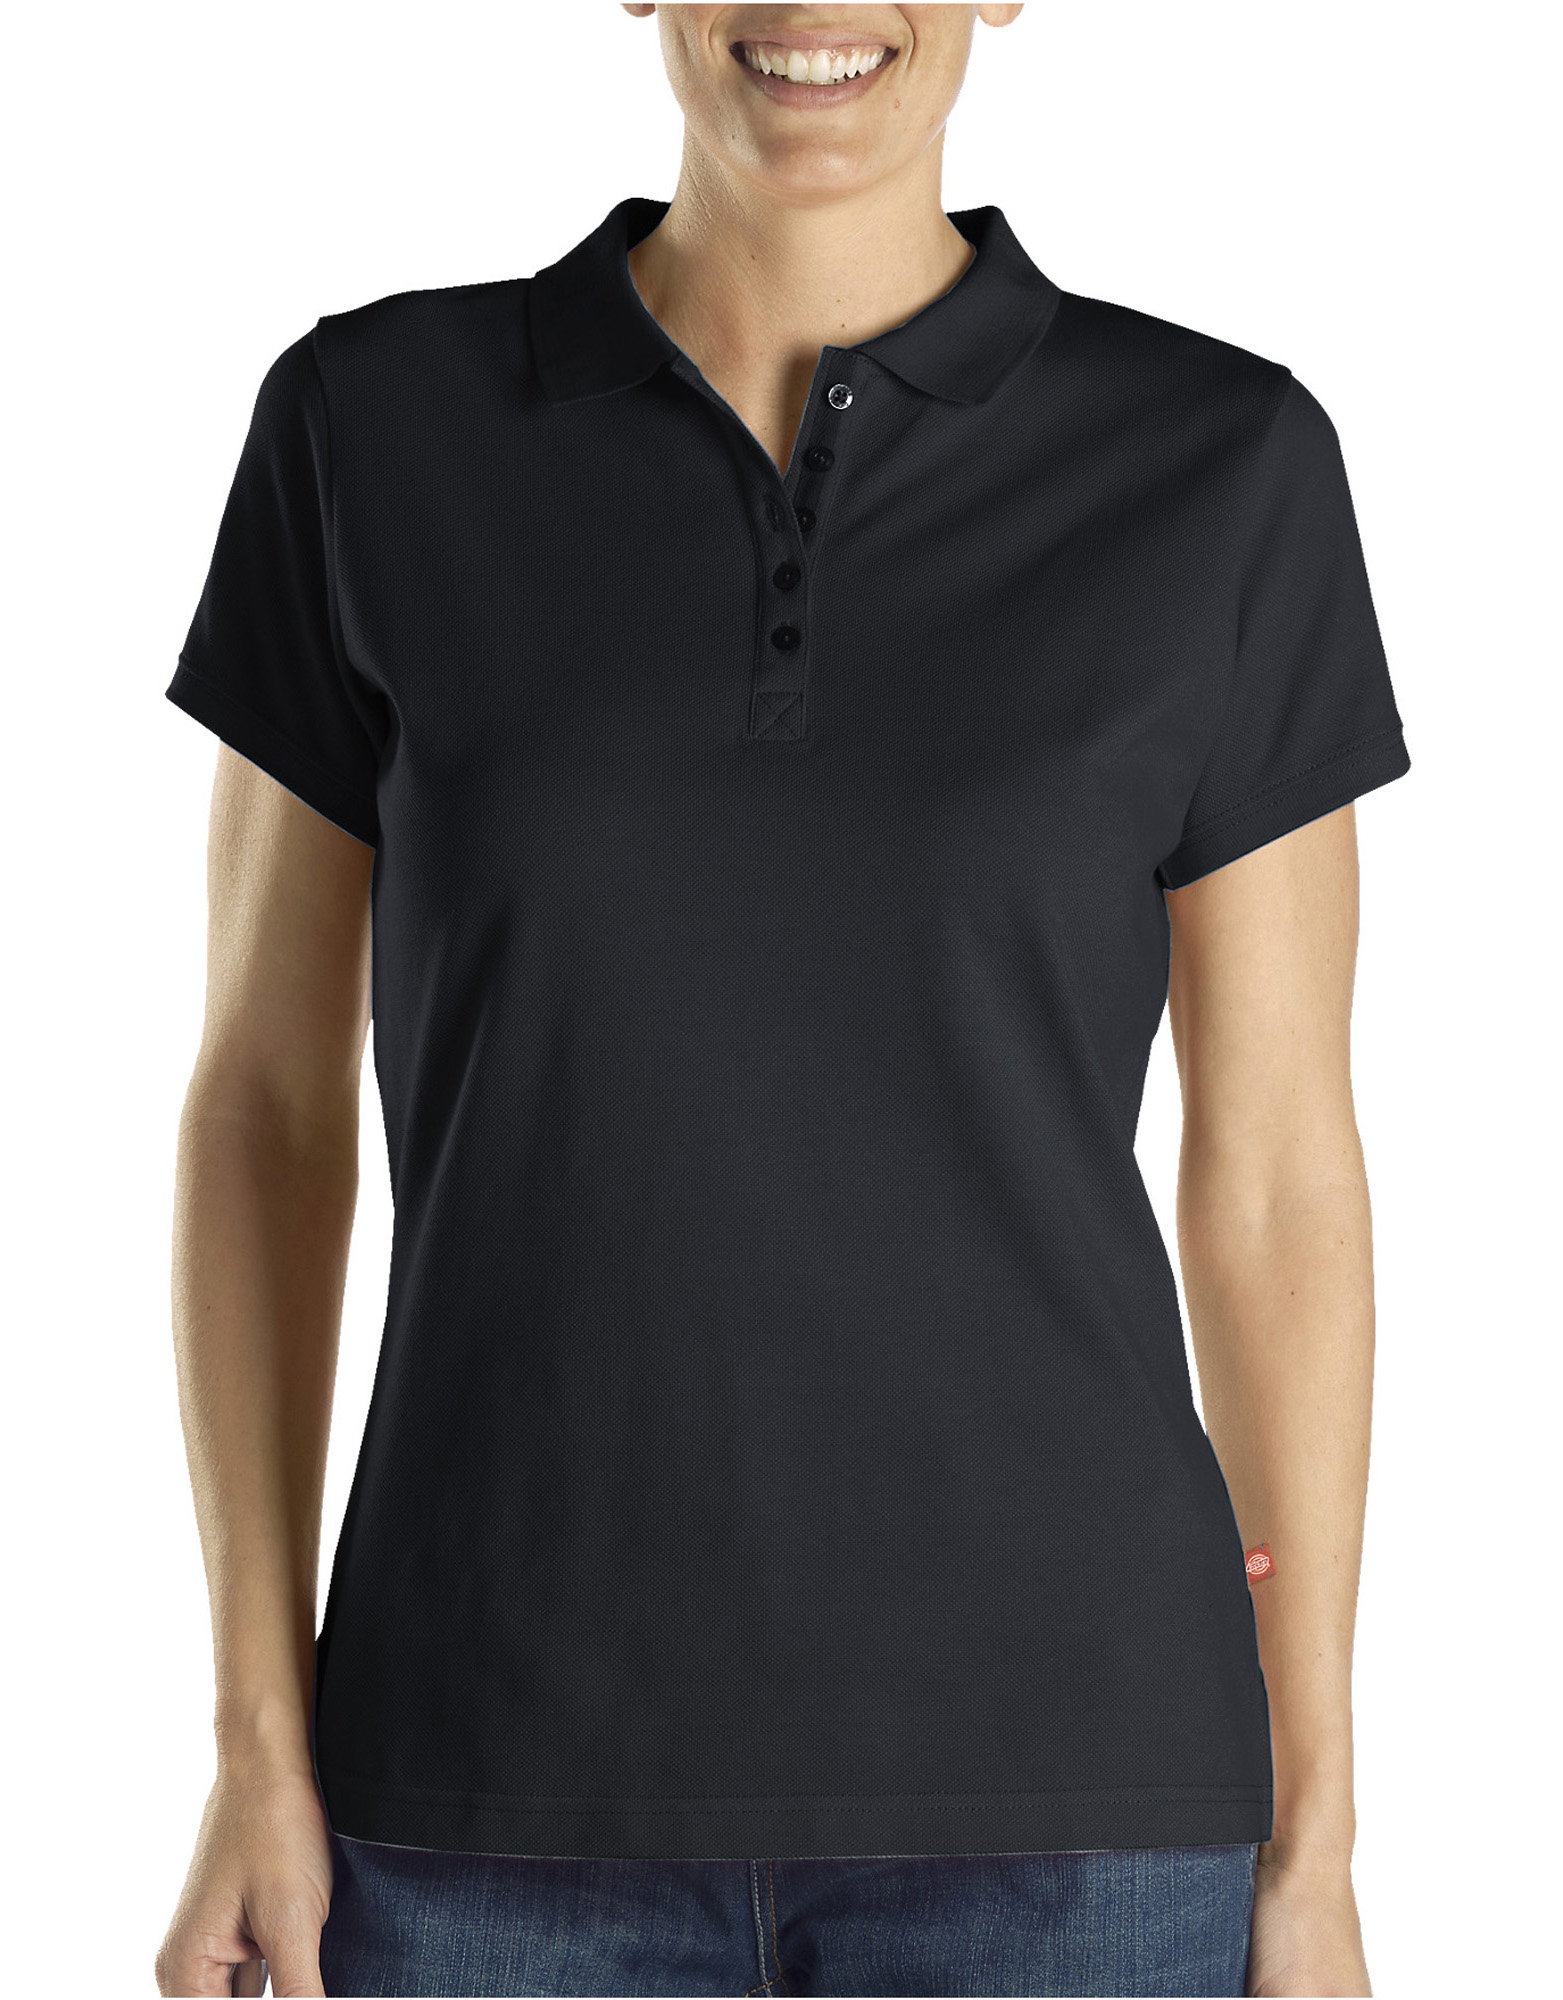 Women's Solid Polo Work Shirts | Dickies